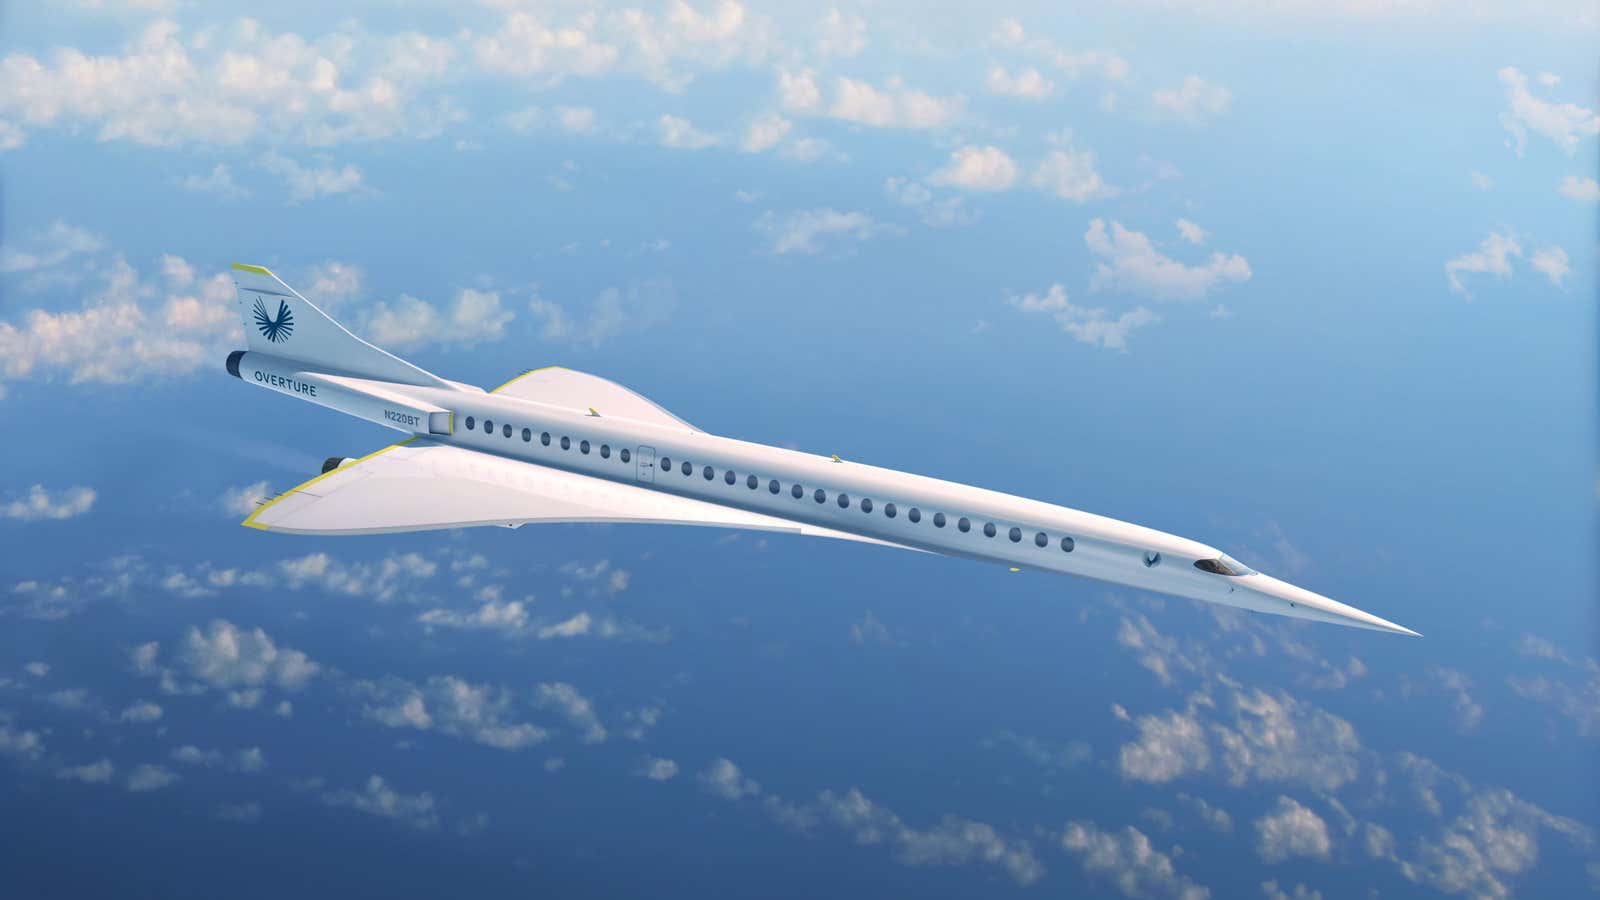 Are luxury travelers ready to shell out for shorter supersonic flights?